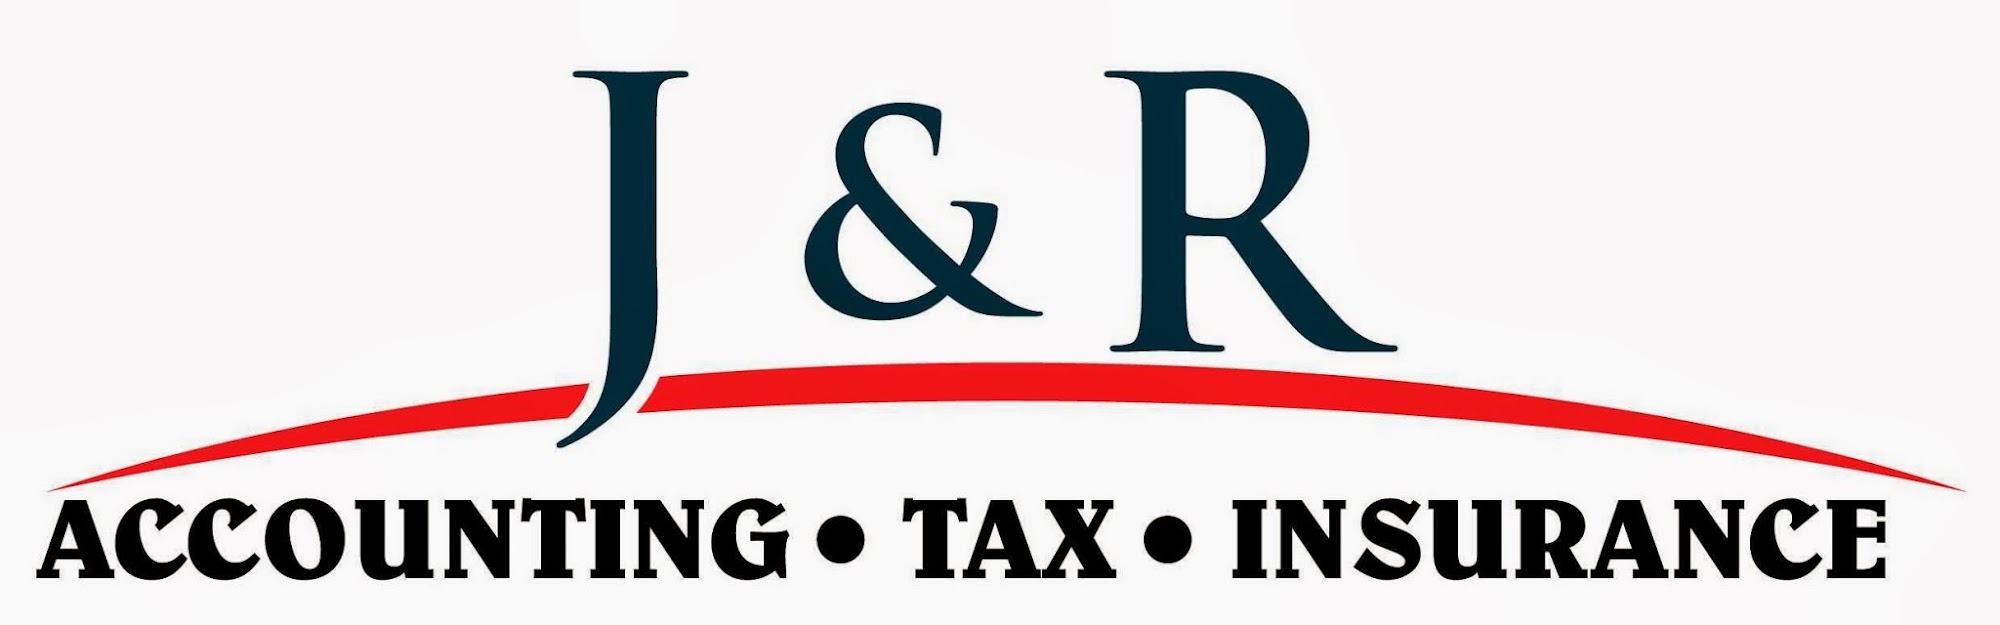 J & R Accounting & Tax Services 487 Jerusalem Ave, Uniondale New York 11553